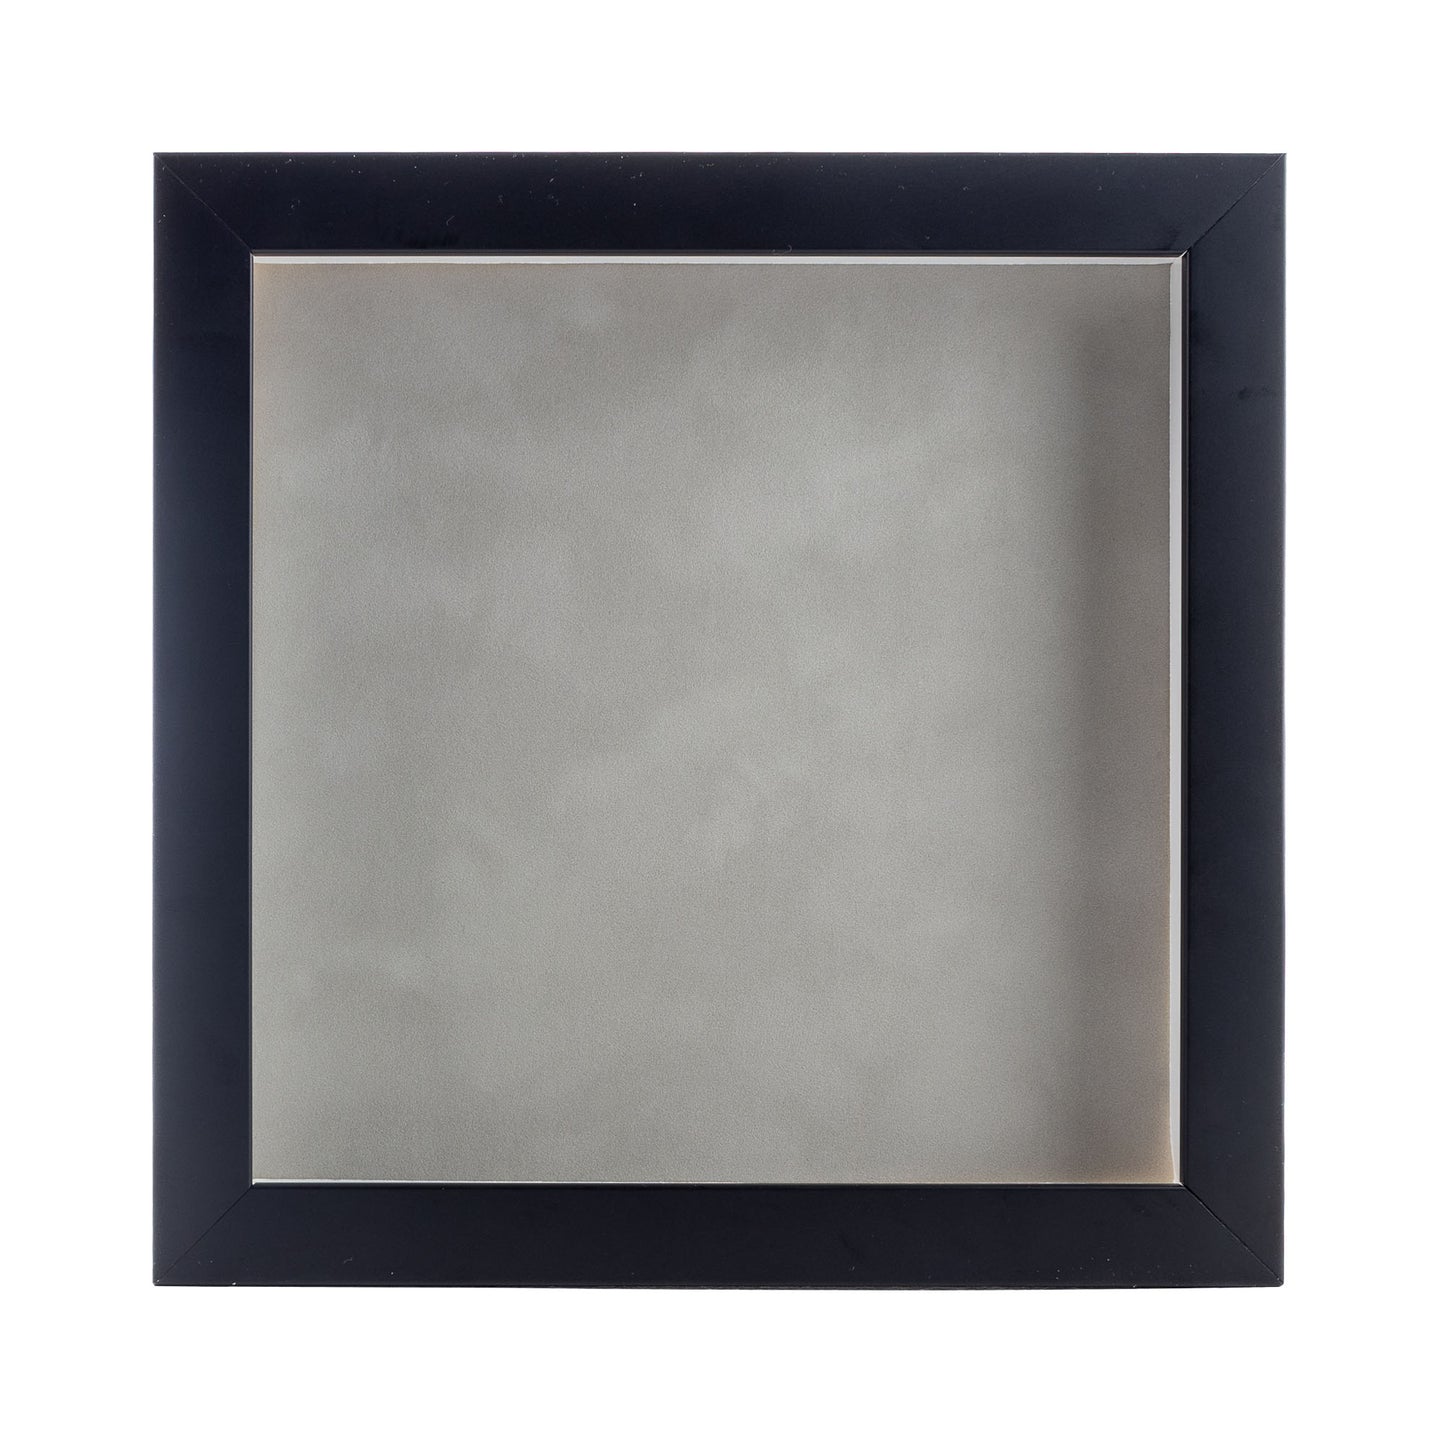 Black Shadow Box Frame With Light Grey Acid-Free Suede Backing